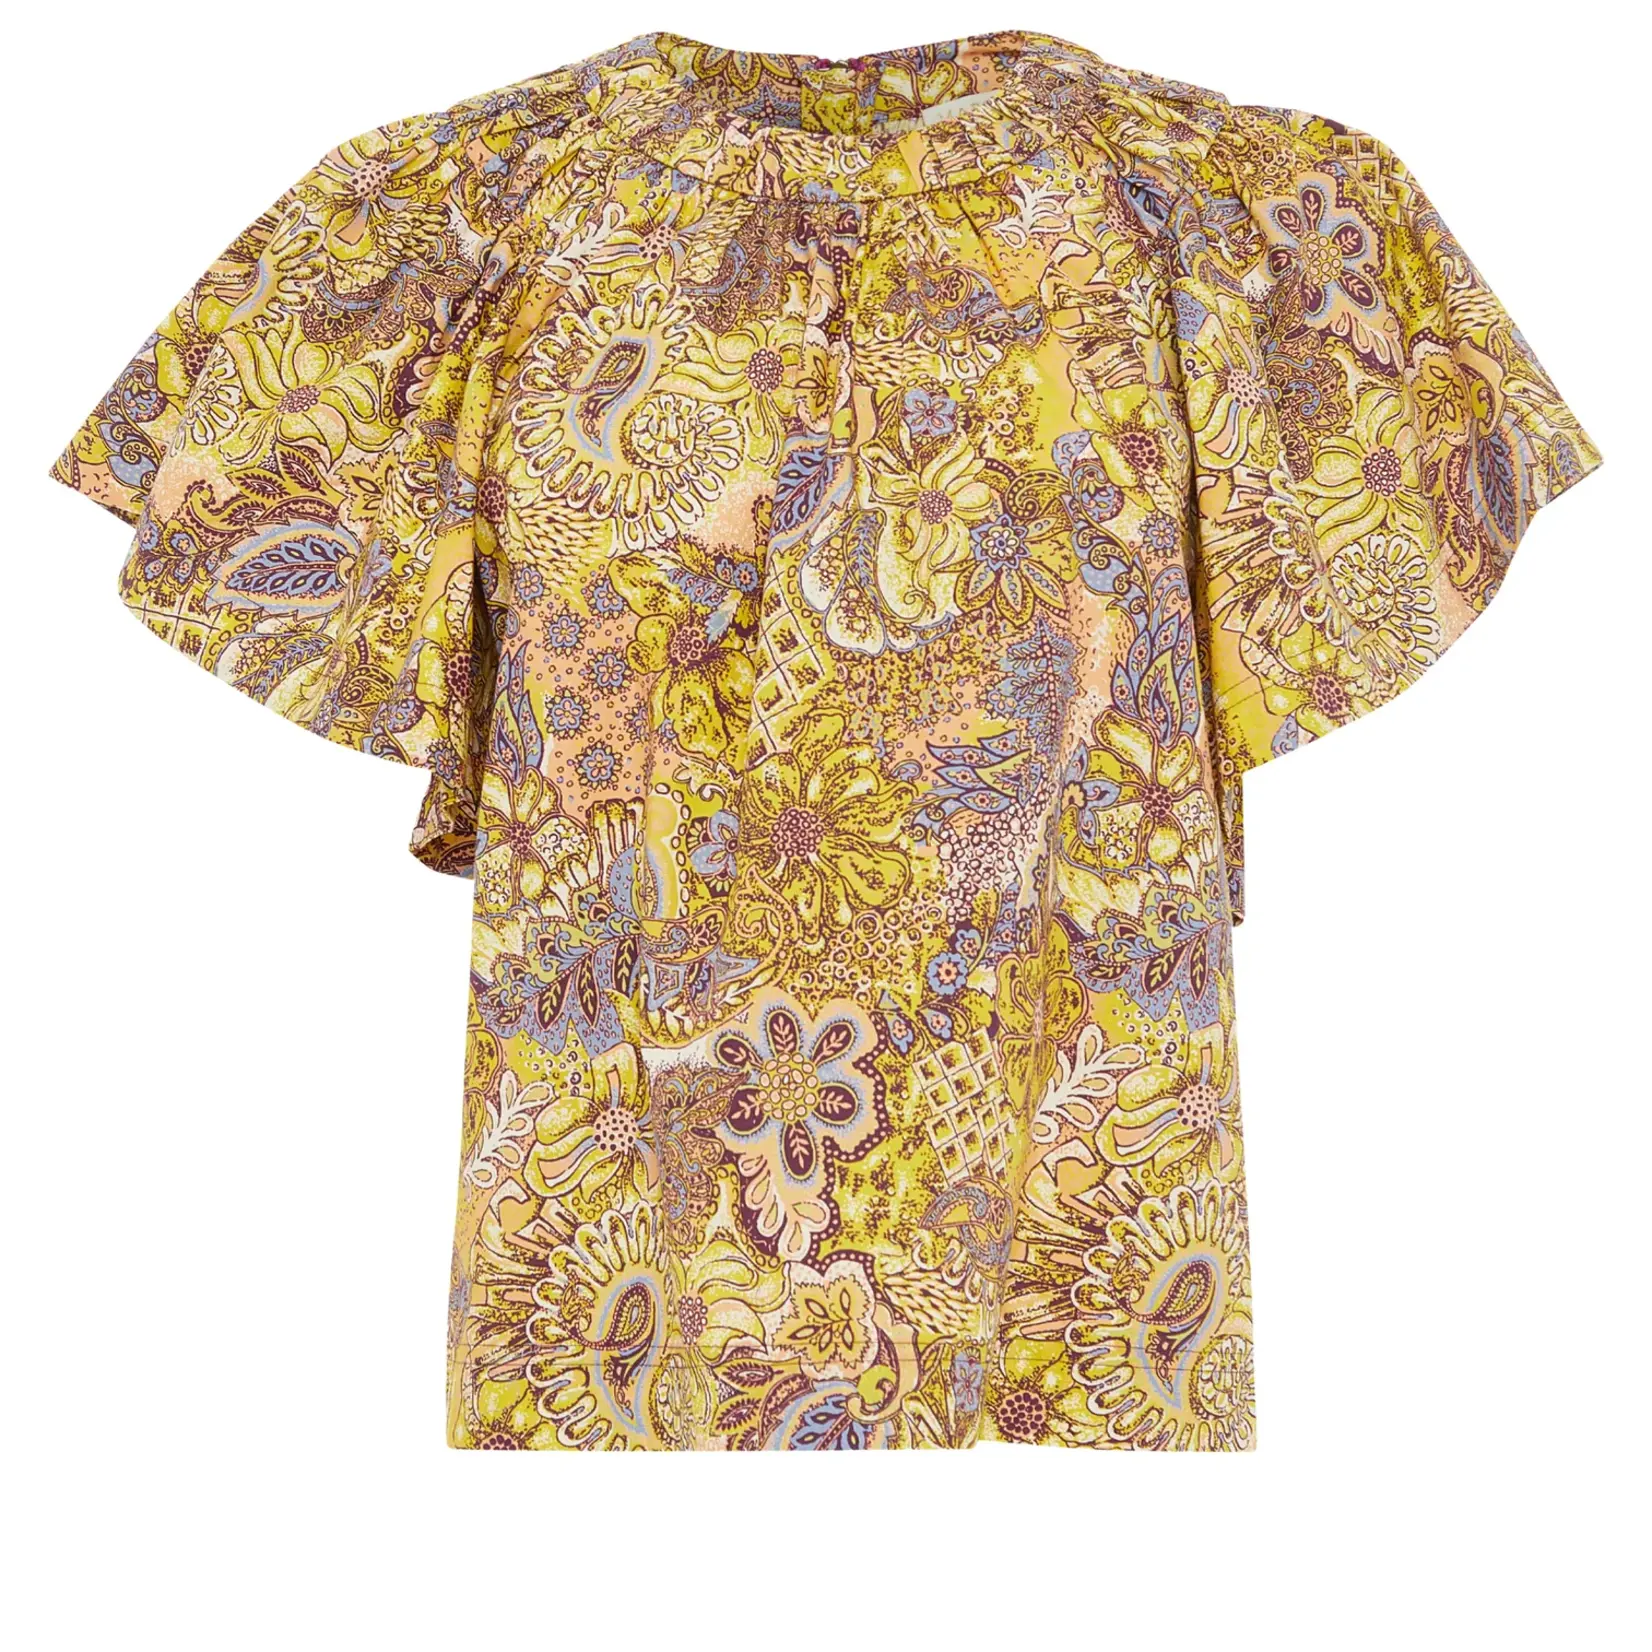 Marie Oliver Persey Top